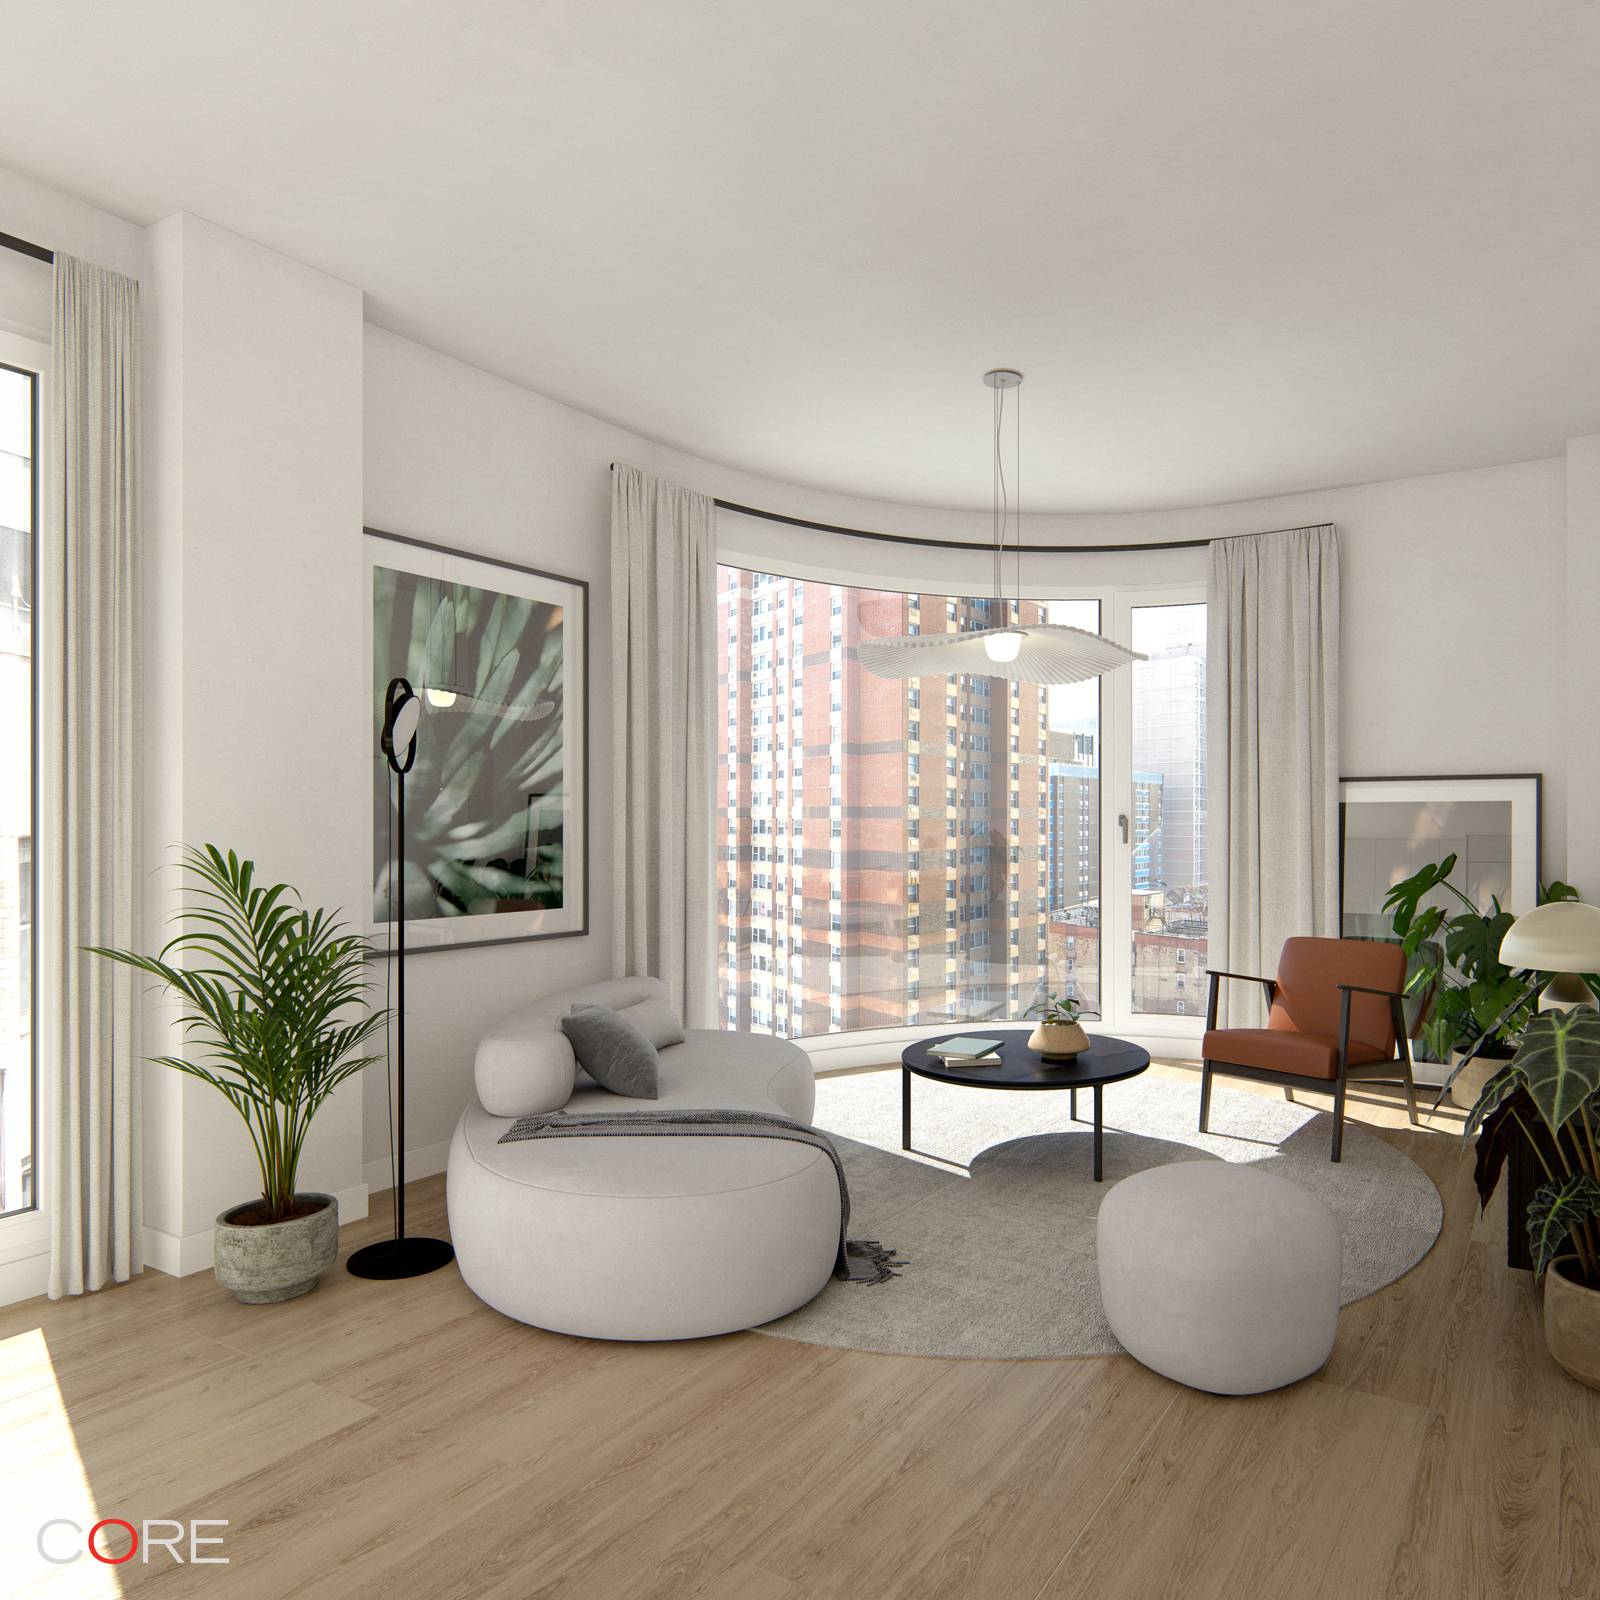 Live, Work... Perfection Welcome to Hendrix House, the first building in New York City explicitly designed for those looking to maximize their life and work from the serenity of their ...